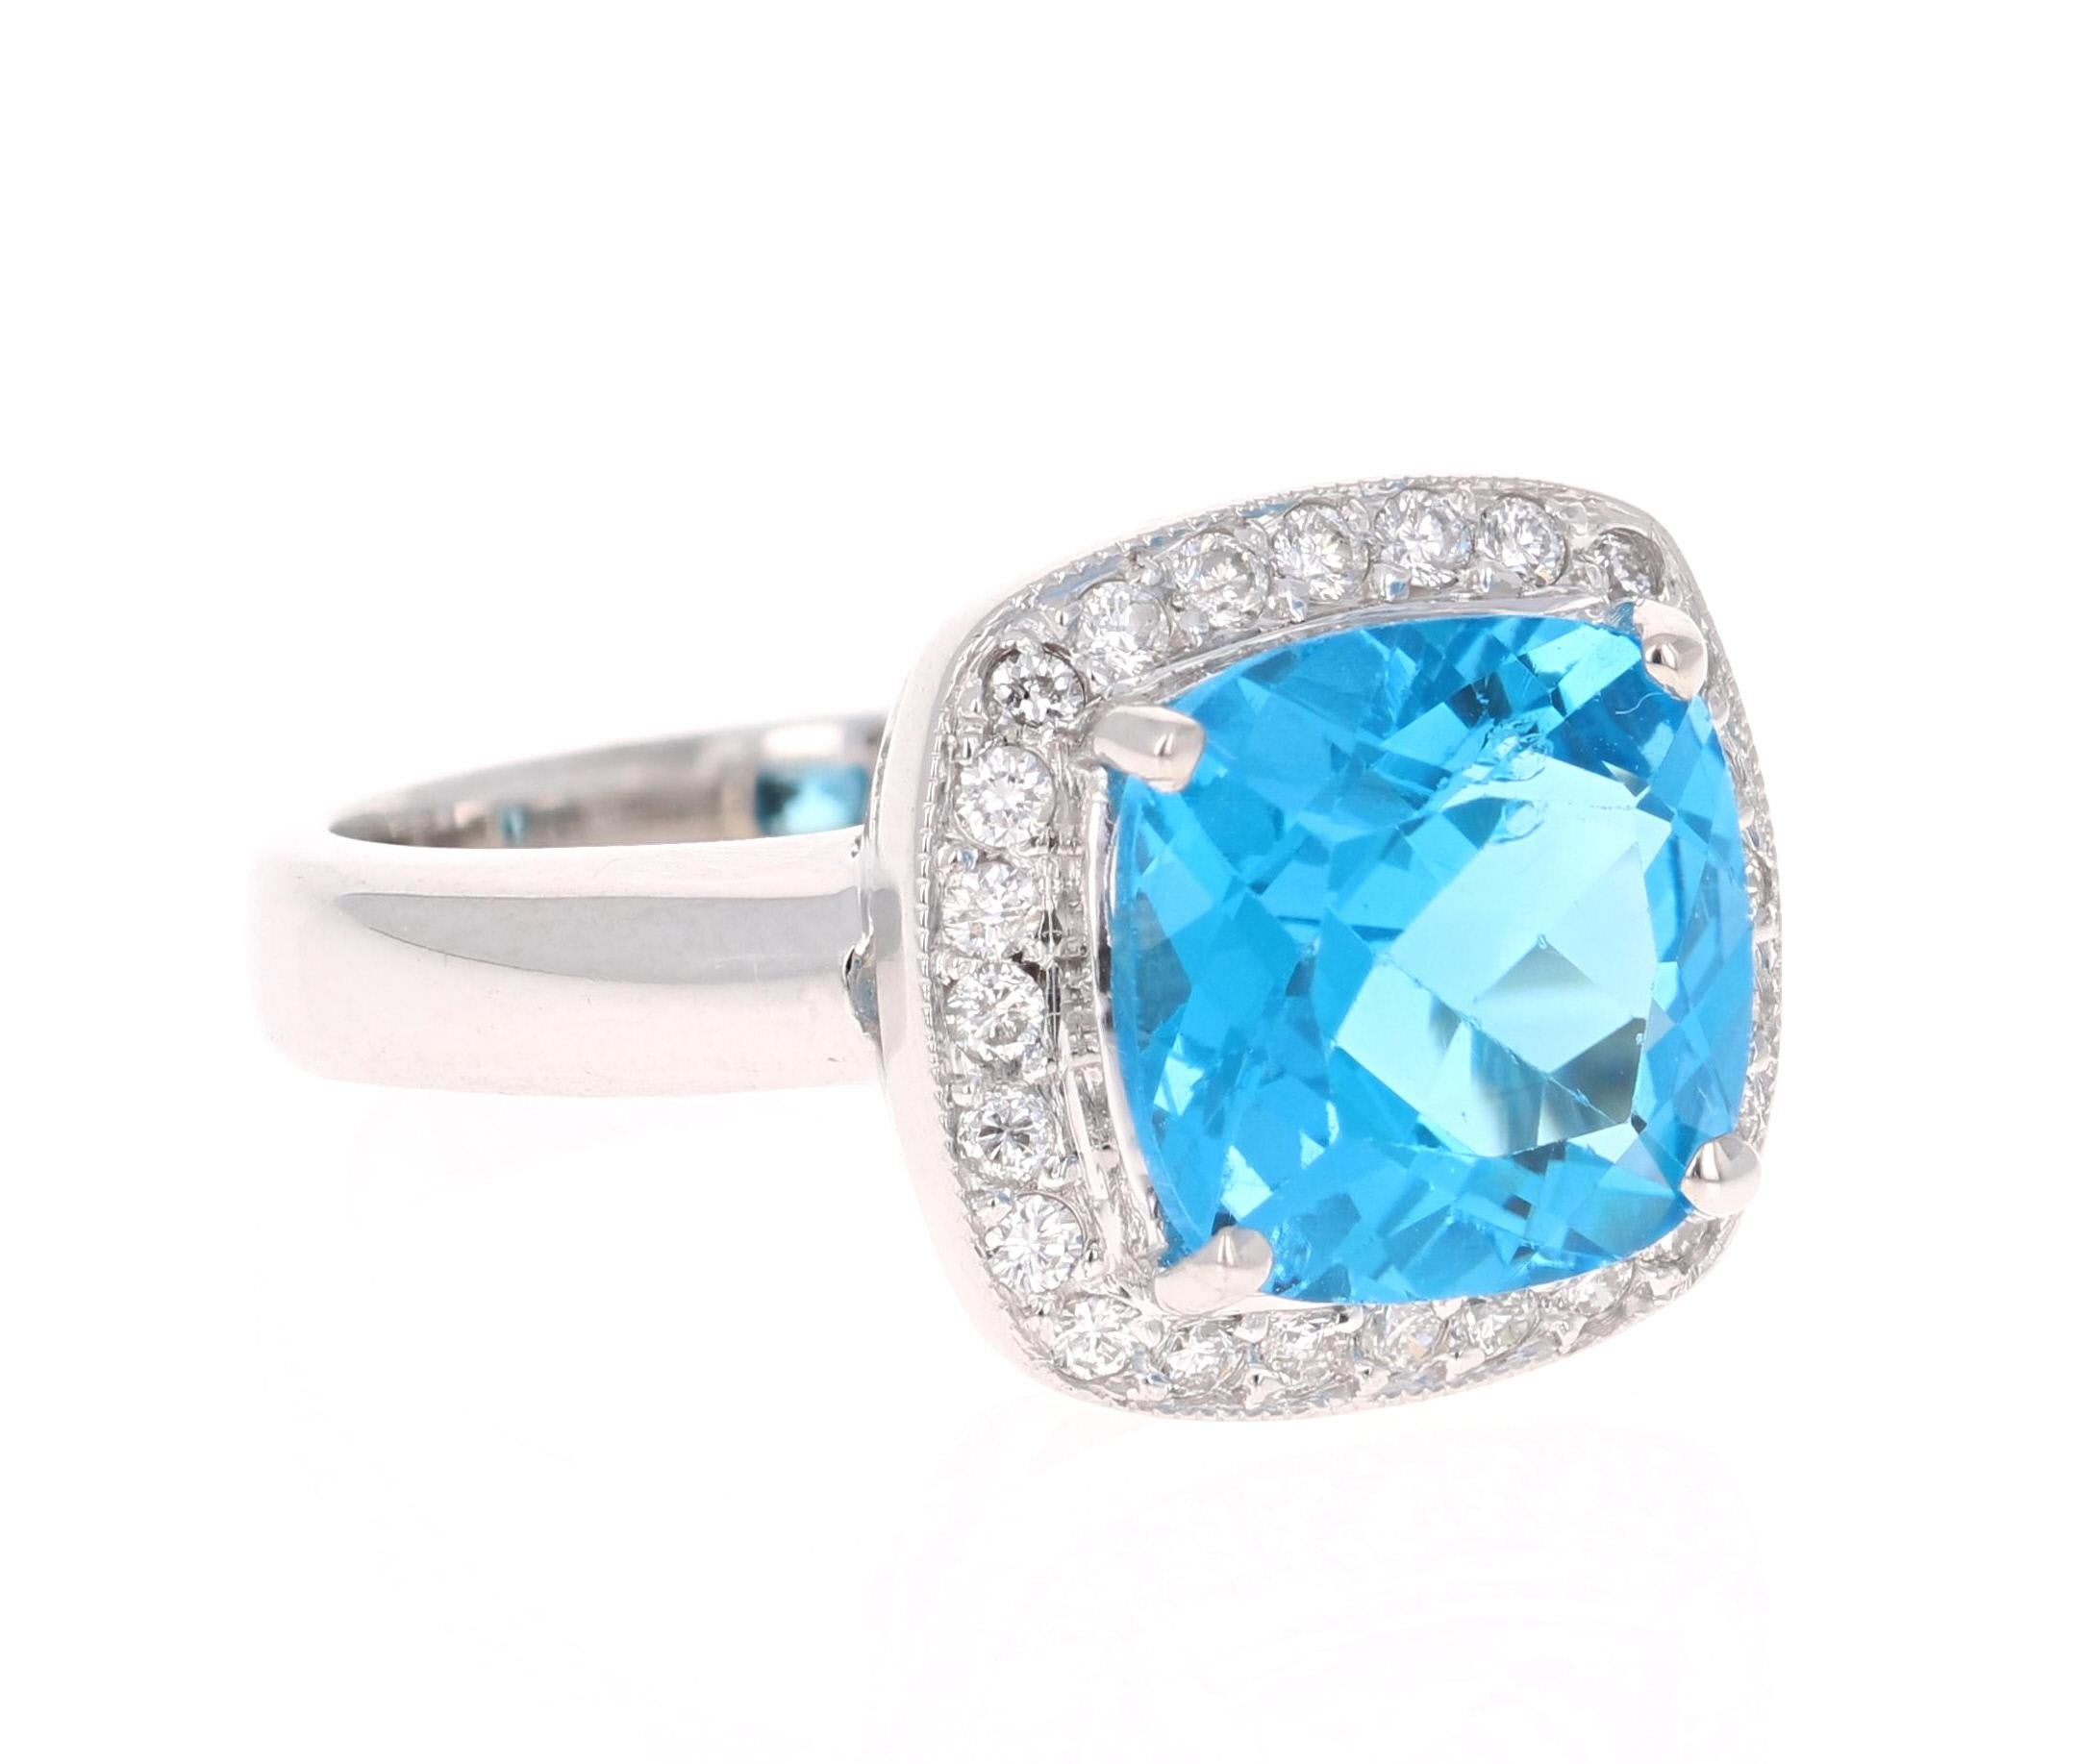 This stunning statement ring has a Cushion Cut Blue Topaz that weighs 4.96 Carats. 
It is surrounded by a simple halo of 24 Round Cut Diamonds that weighs 0.33 Carats. The clarity and color of the diamonds are SI-F. 

It is crafted in 14 Karat White